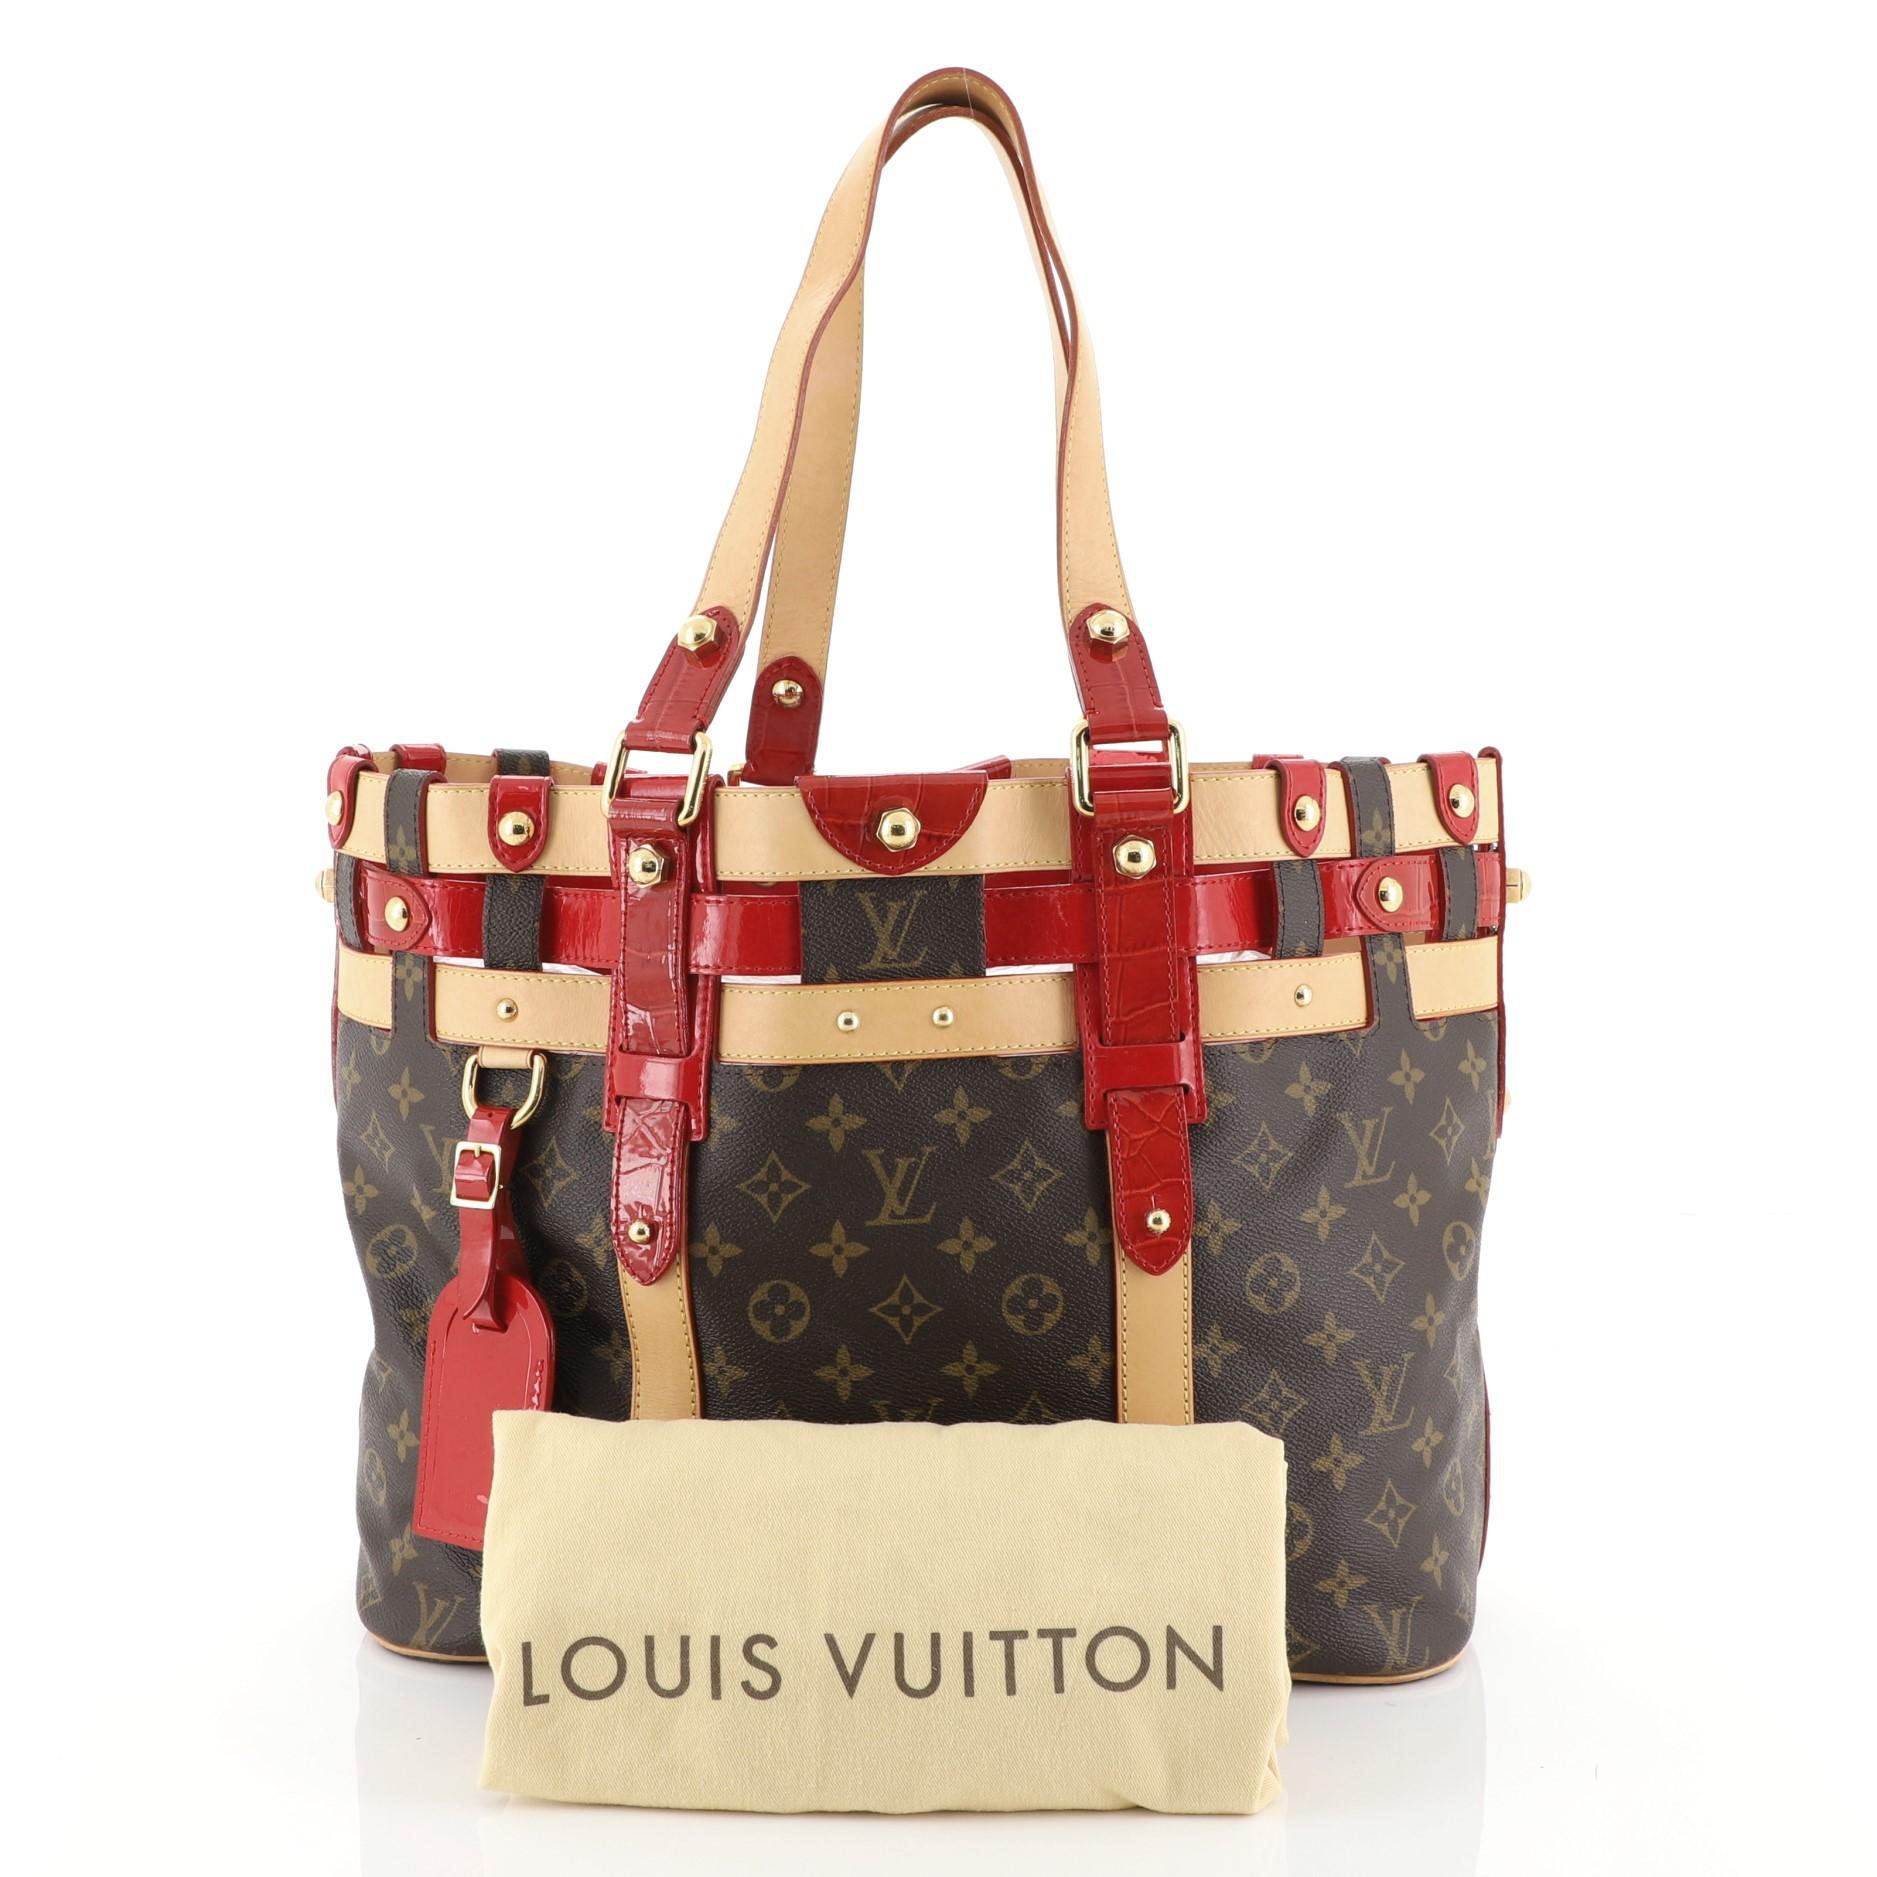 This Louis Vuitton Salina Handbag Limited Edition Rubis Monogram Canvas MM, crafted in brown monogram coated canvas, features dual flat leather handles, natural leather trim, red patent crocodile embossed leather, protective base studs and gold-tone